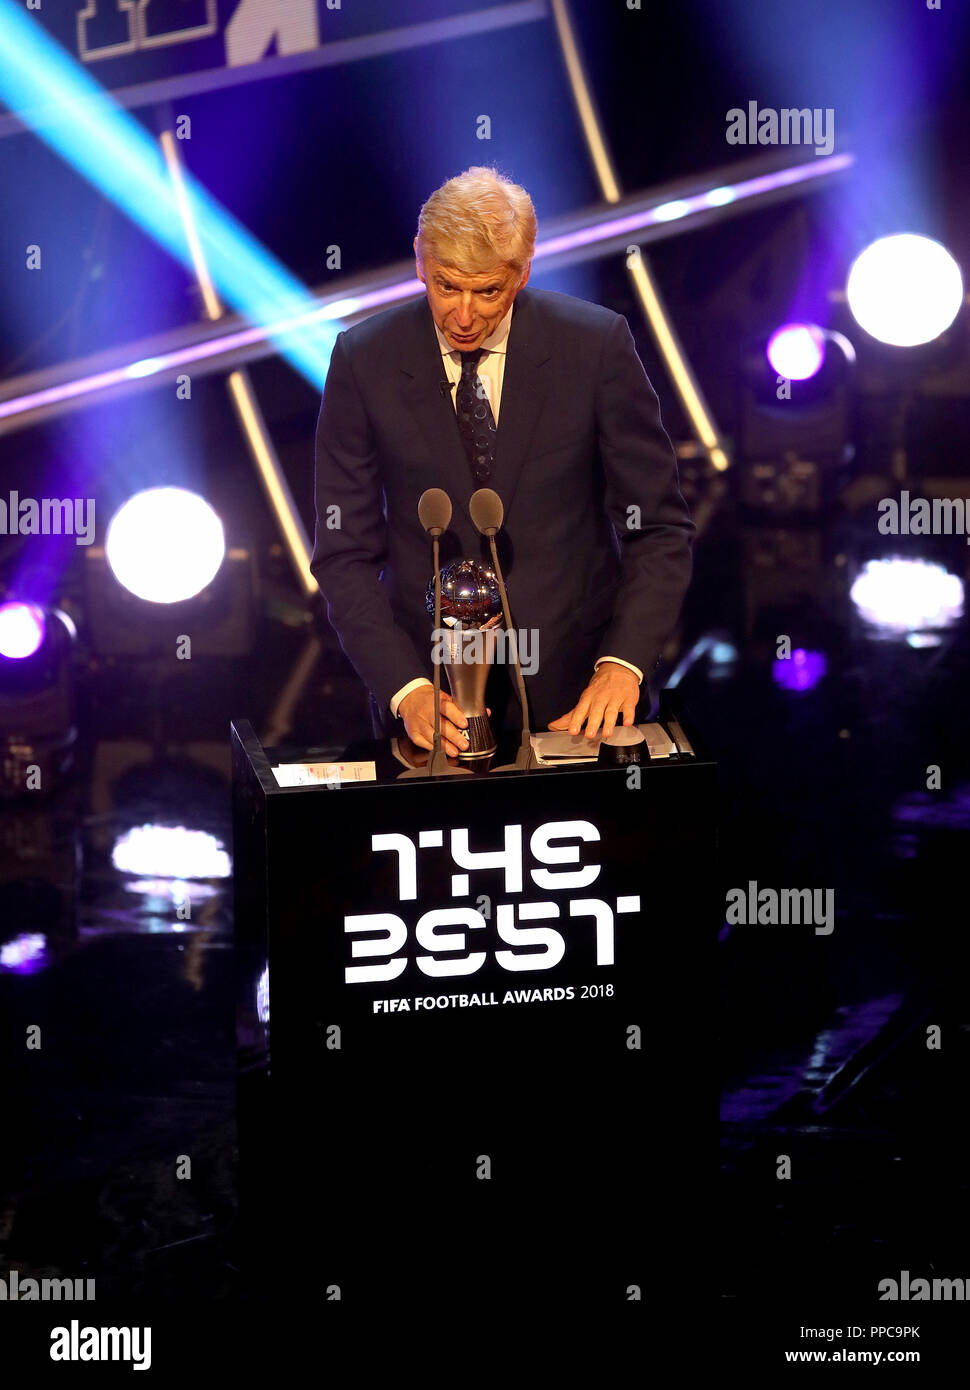 Arsene Wenger on stage presenting The Best FIFA Men's Coach Award during the Best FIFA Football Awards 2018 at the Royal Festival Hall, London. PRESS ASSOCIATION Photo. Picture date: Monday September 24, 2018. See PA story SOCCER Awards. Photo credit should read: Tim Goode/PA Wire Stock Photo